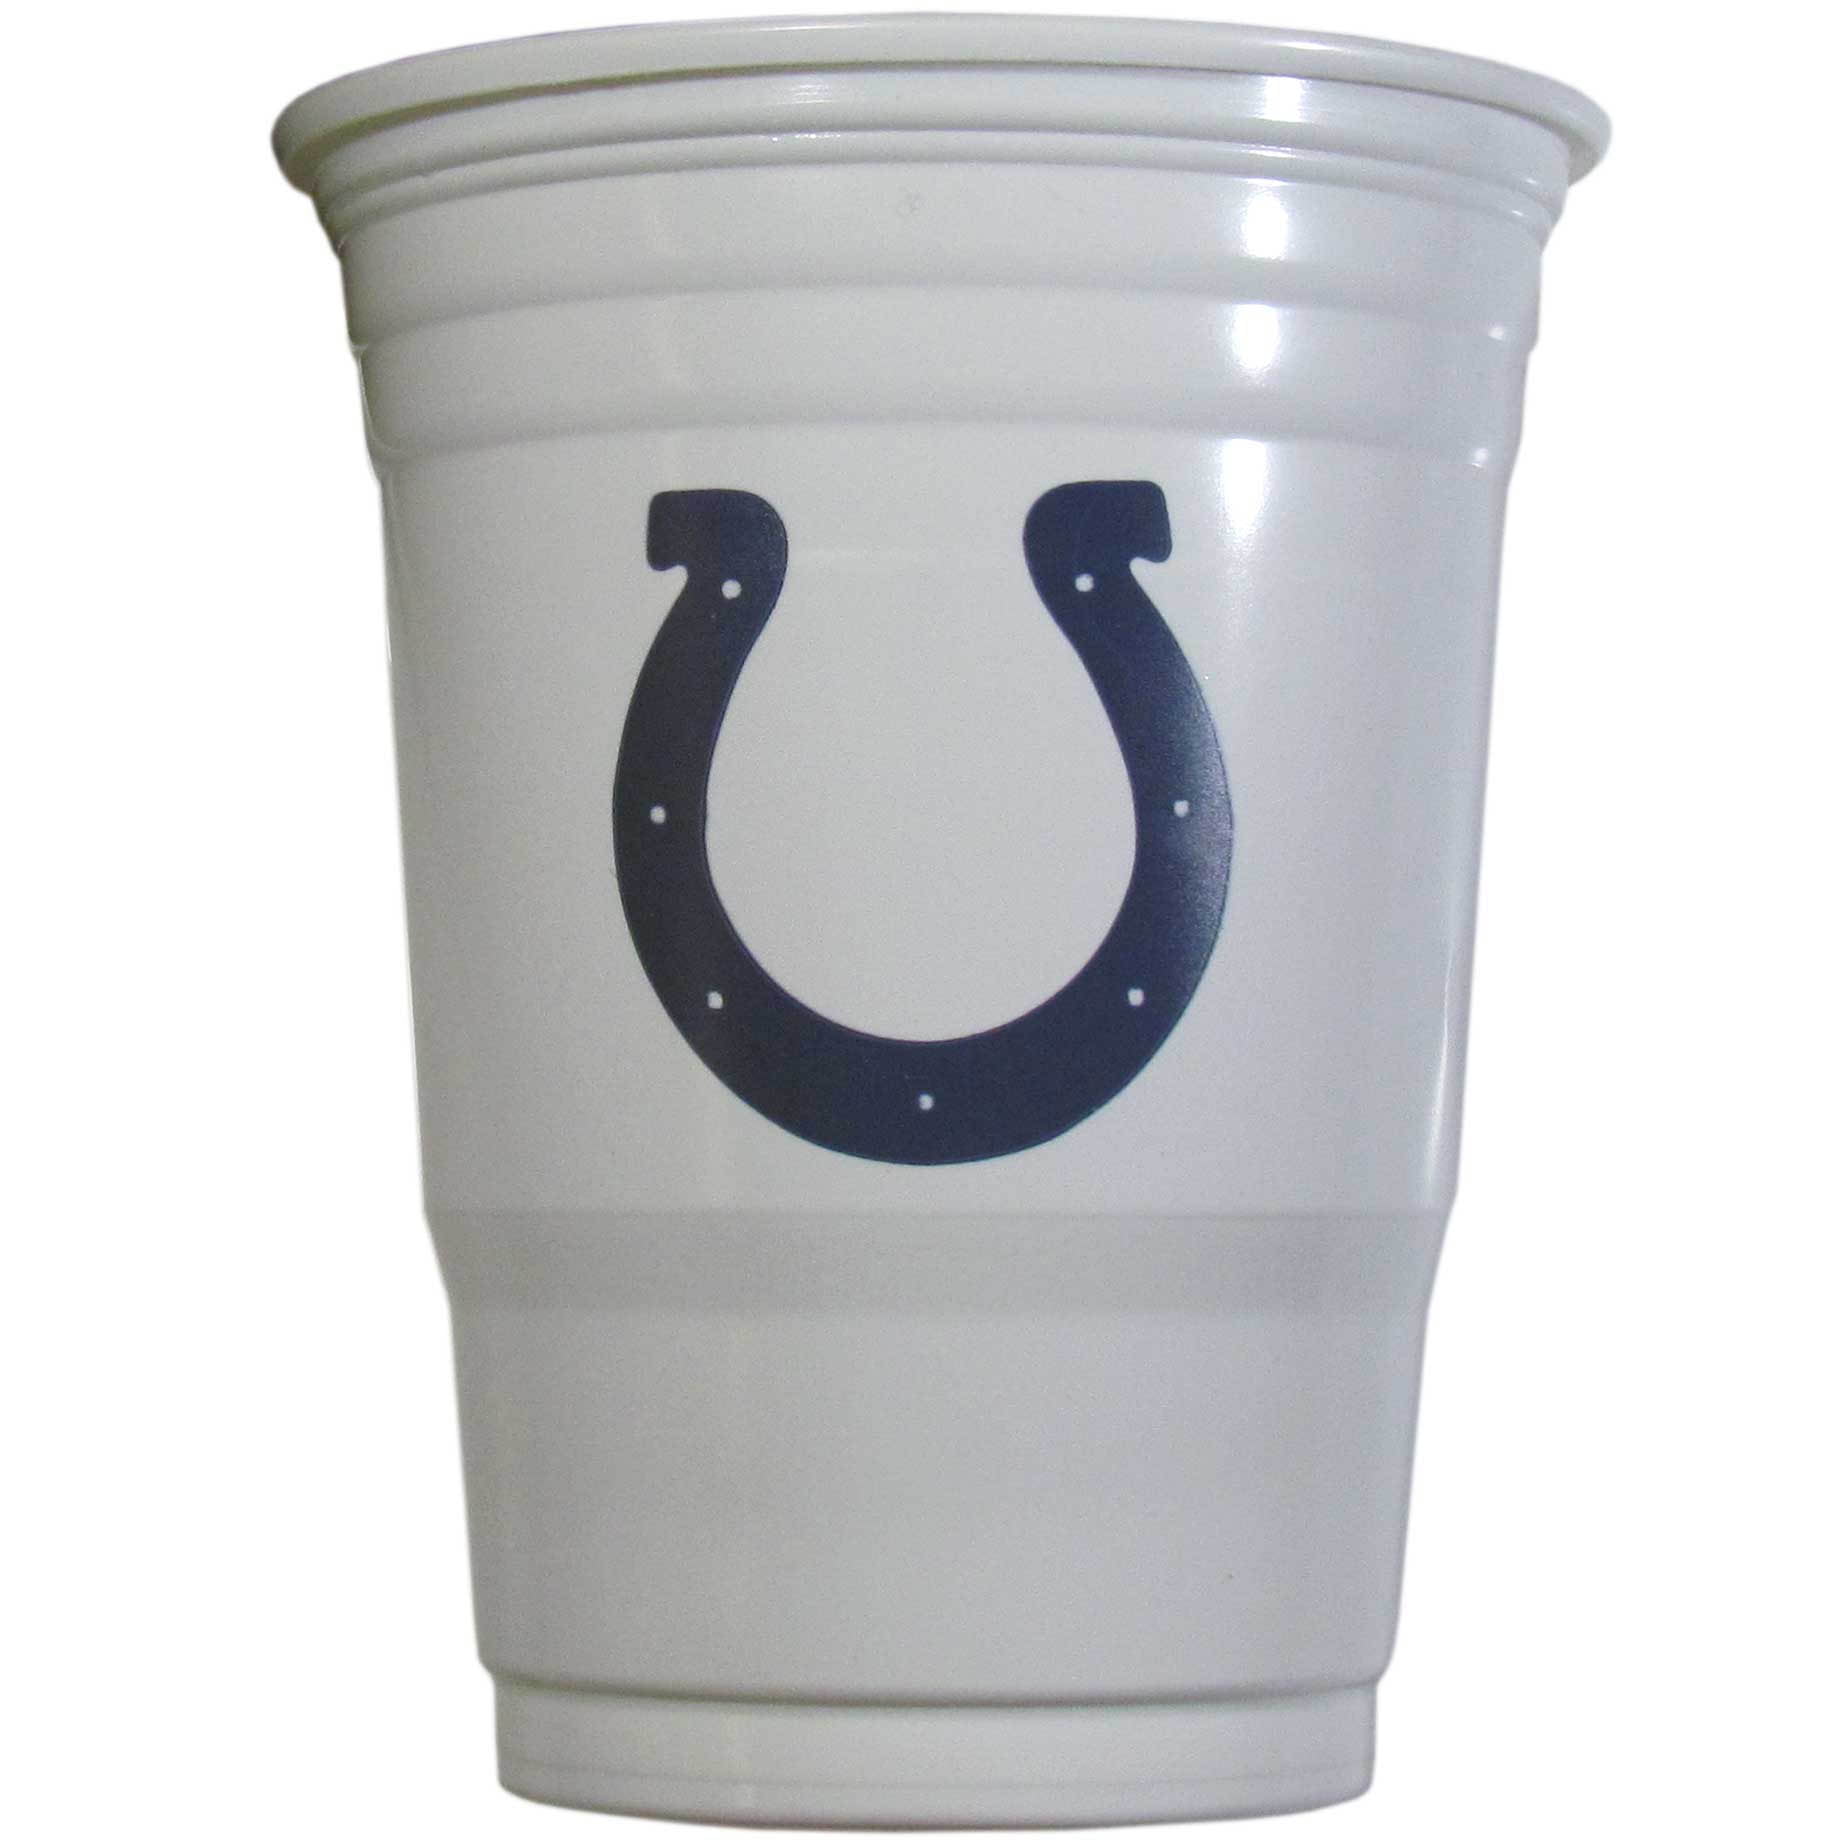 Indianapolis Colts Official NFL 18 oz Game Day Cups by Siskiyou